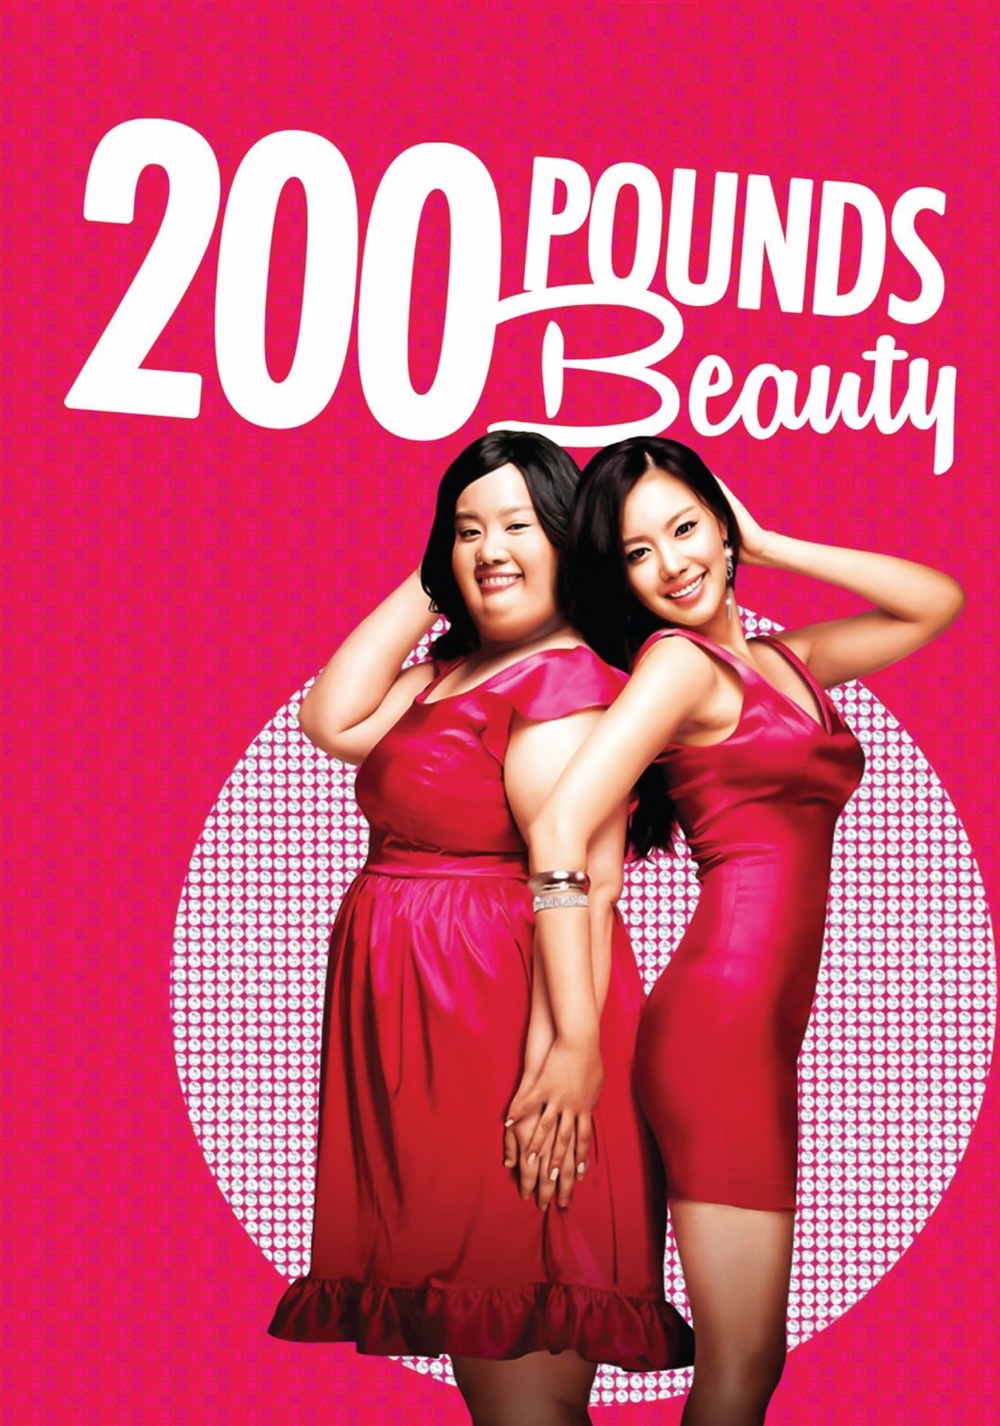 200 pounds beauty (Korean movie) review, contains ending spoilers